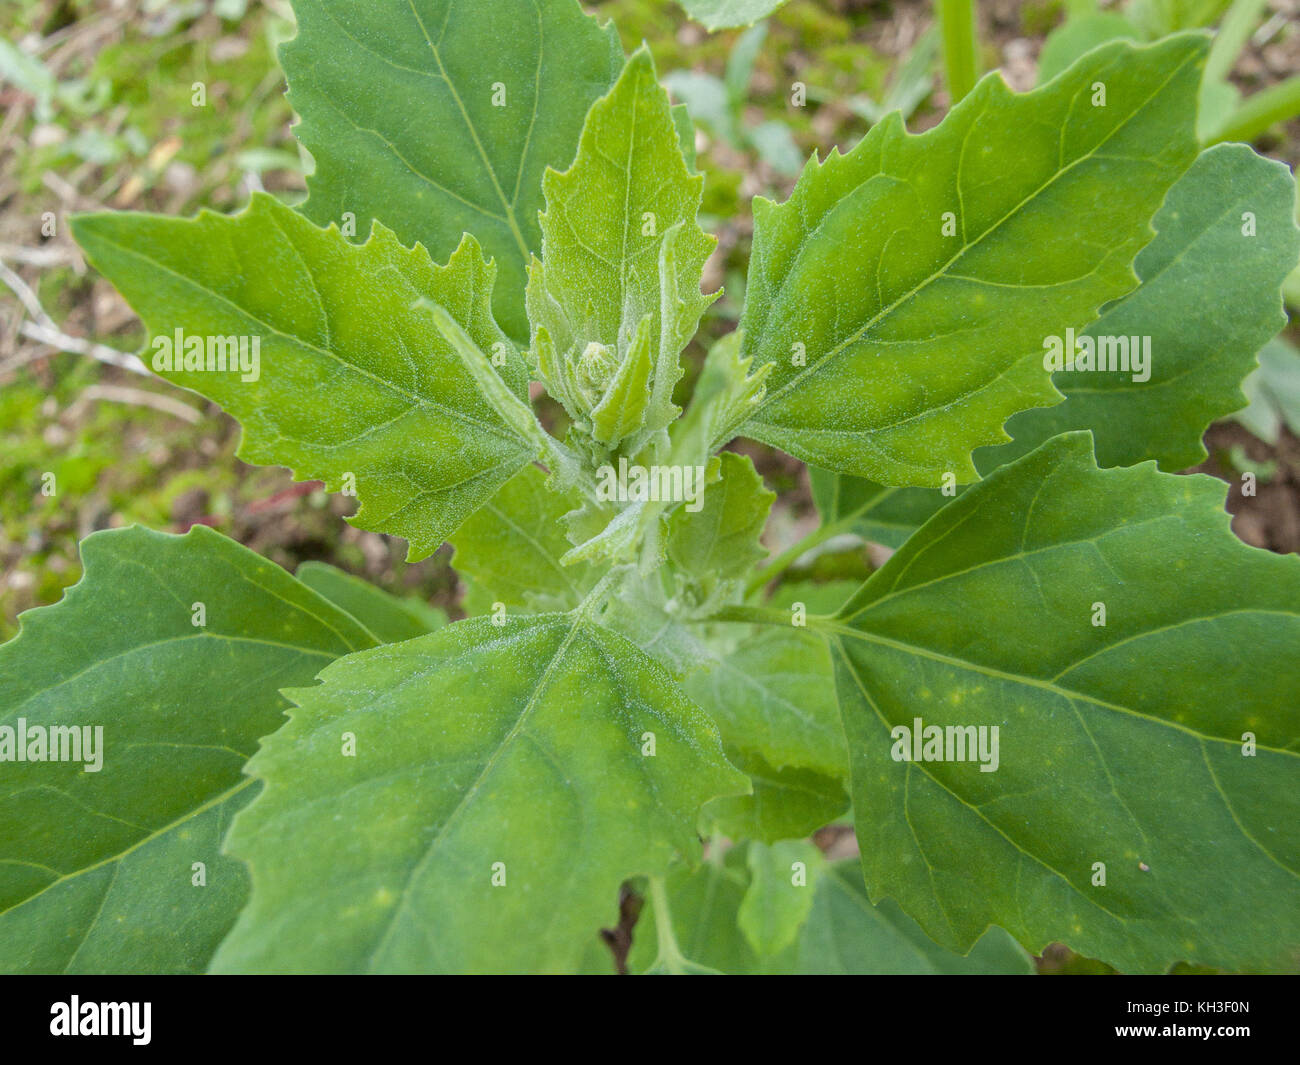 Foliage leaves of Fat-Hen / Chenopodium album - an agricultural weed that is edible and was once regularly used as food. Now a foraged wild food. Stock Photo